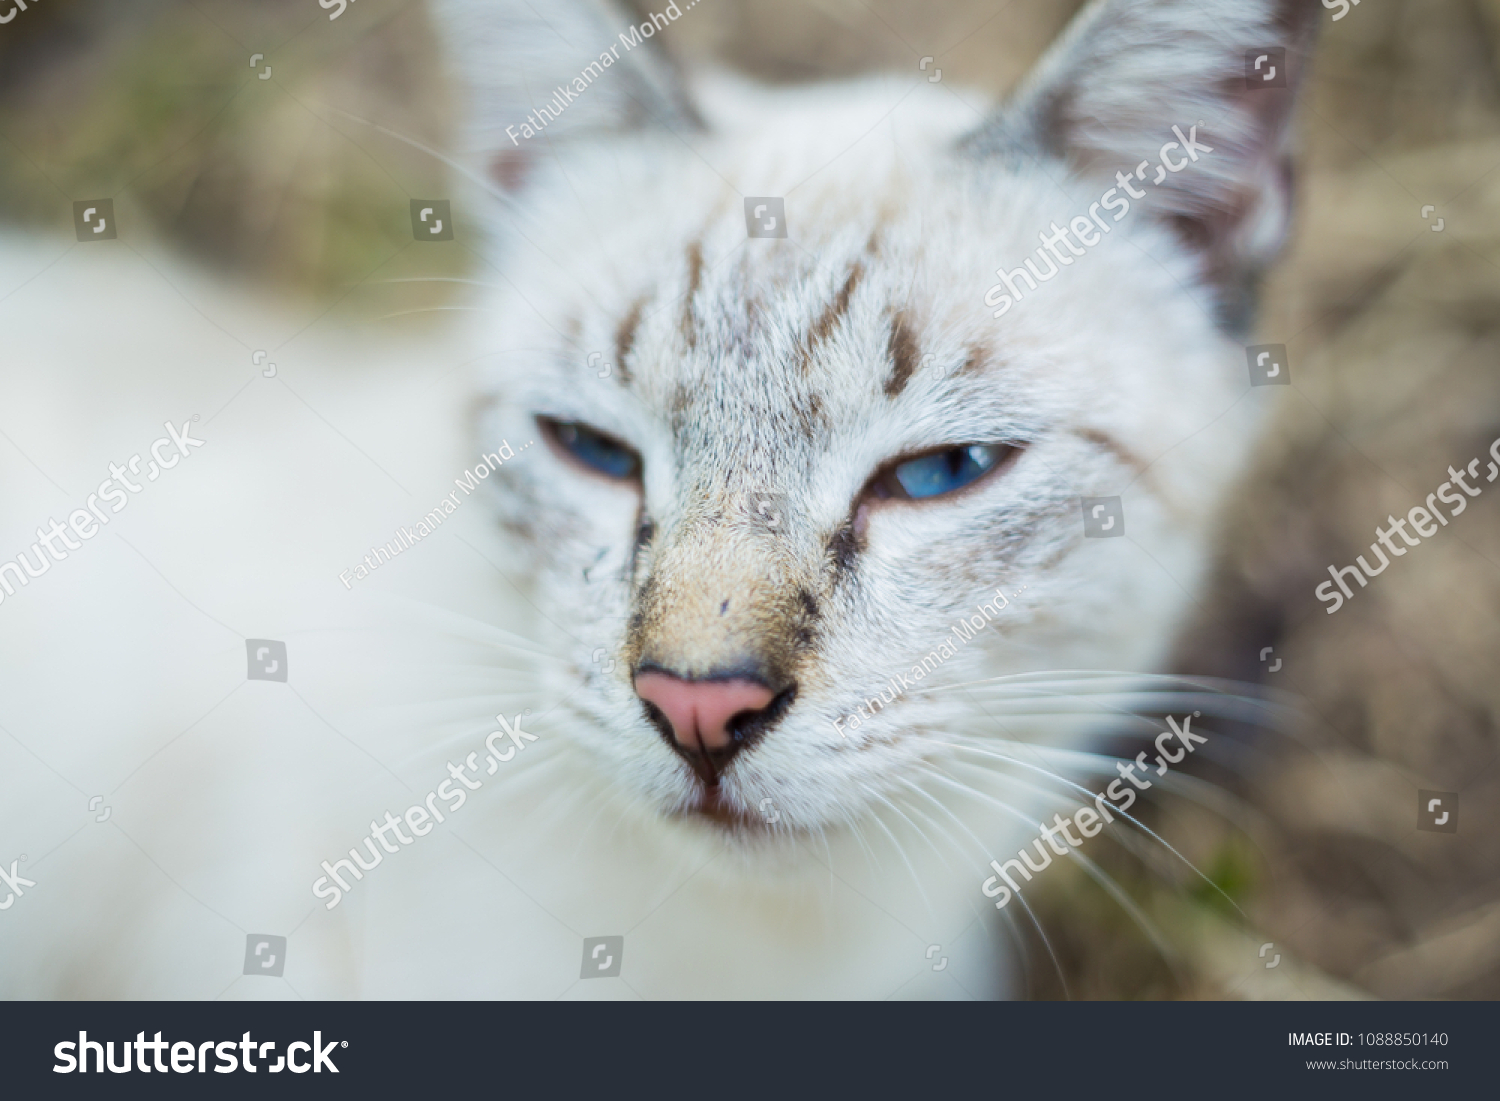 white cat with gray stripes